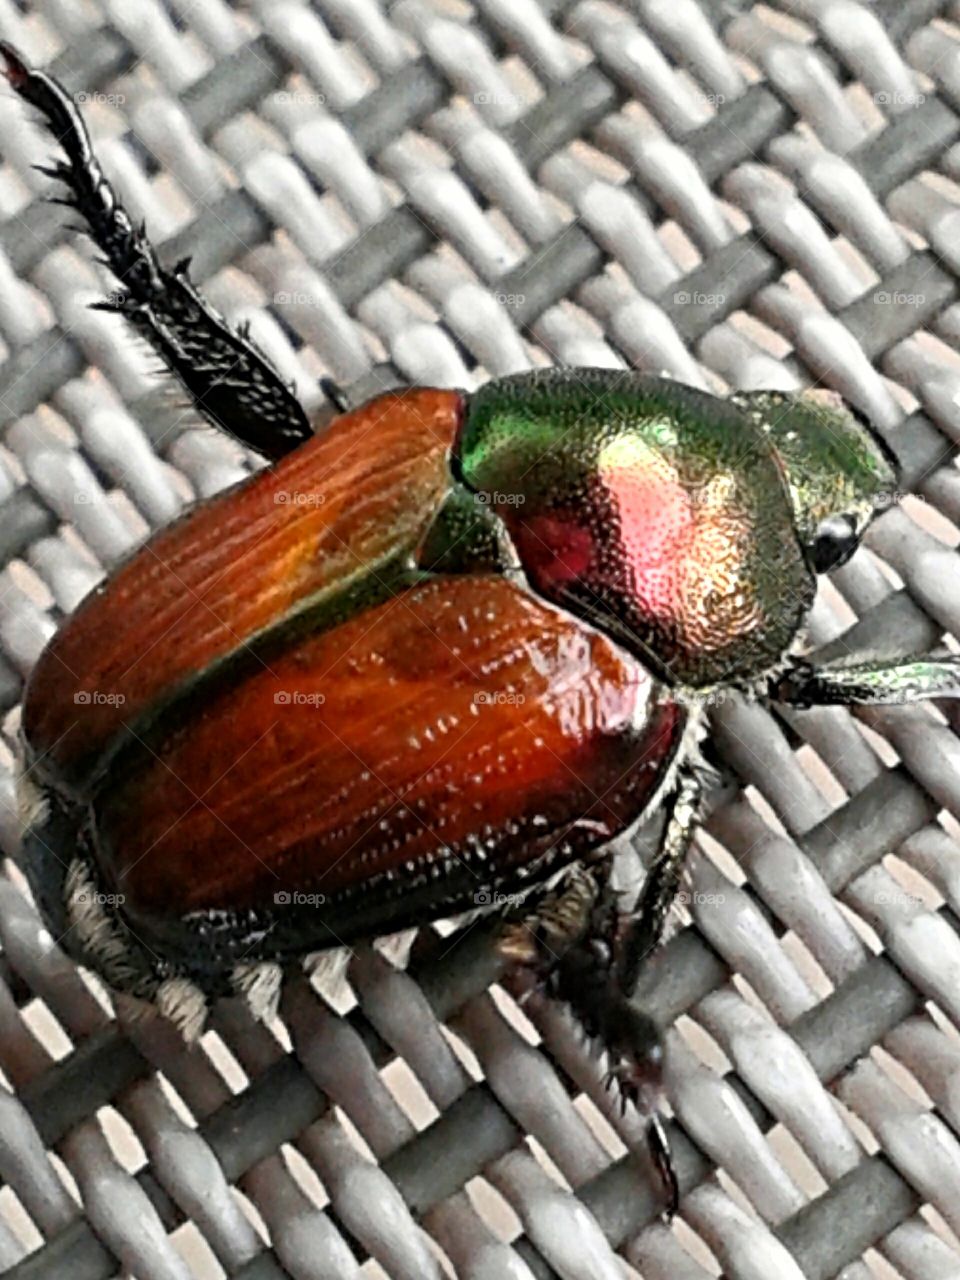 Japanese Beetle. Hanging out on a chair.